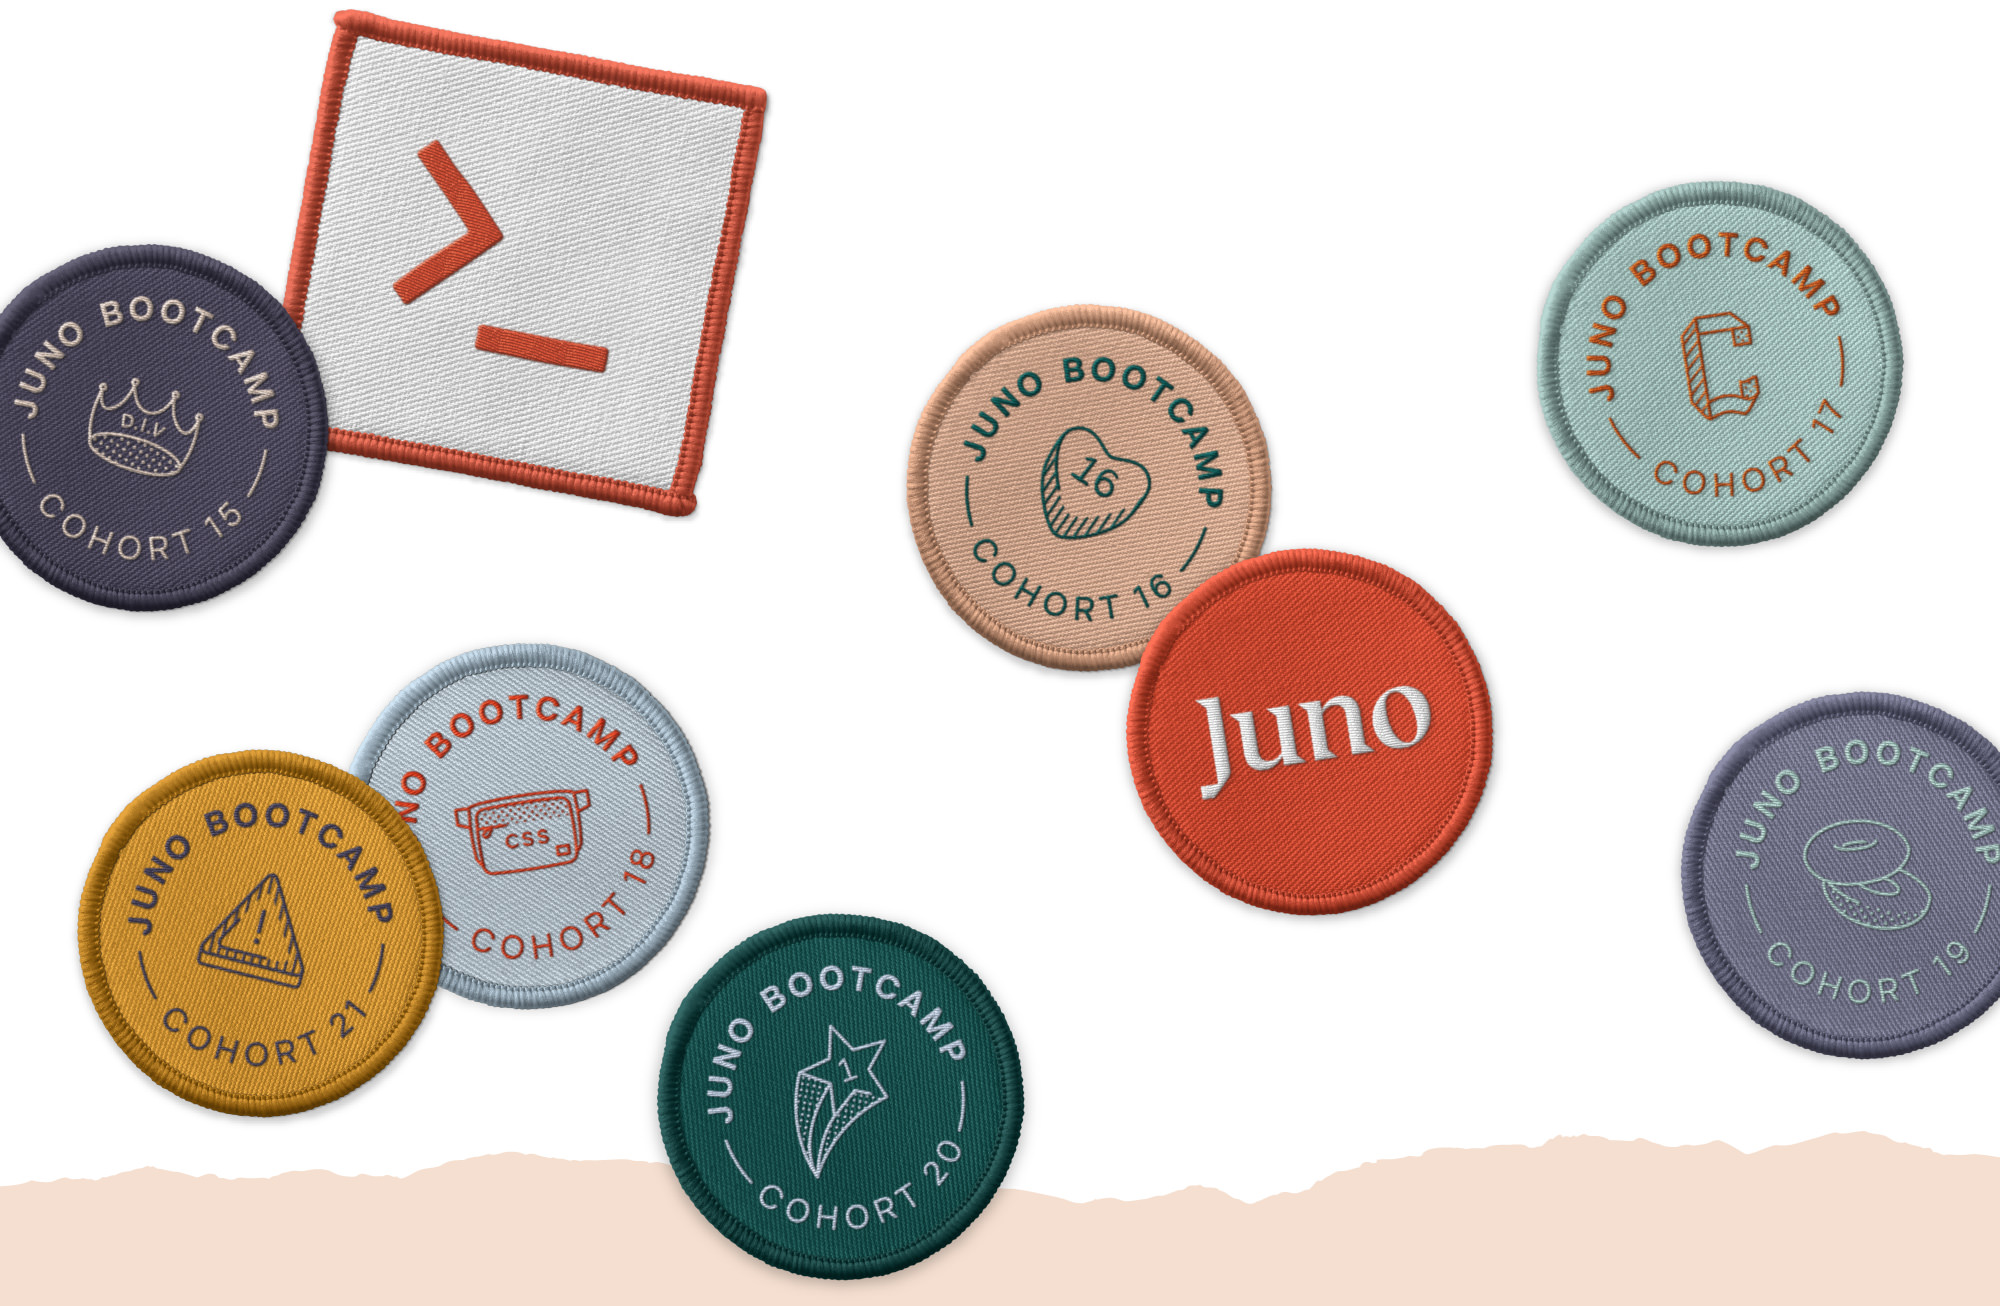 Embroidered patches swag design for Juno Web Development Bootcamp (visual identity exploration)